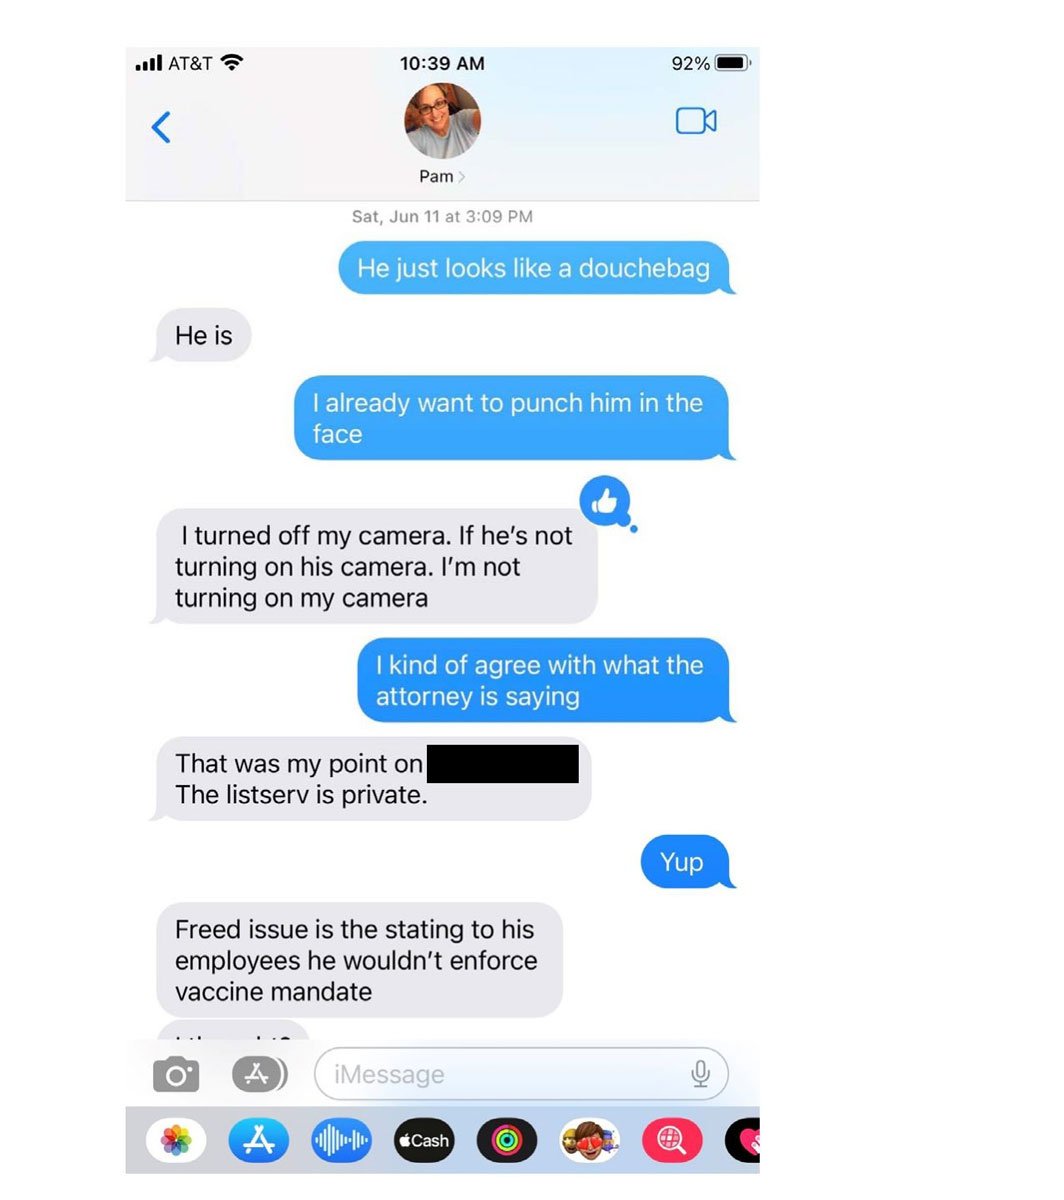 A copy of text messages between Encinitas City Manager Pamela Antil and board colleague William Fraser during an ICMA meeting related to the censure of former member James Freed, the city manager of Port Huron, Michigan. Freed has since filed a defamation lawsuit against ICMA, naming Antil and other board members as defendants. Screenshot